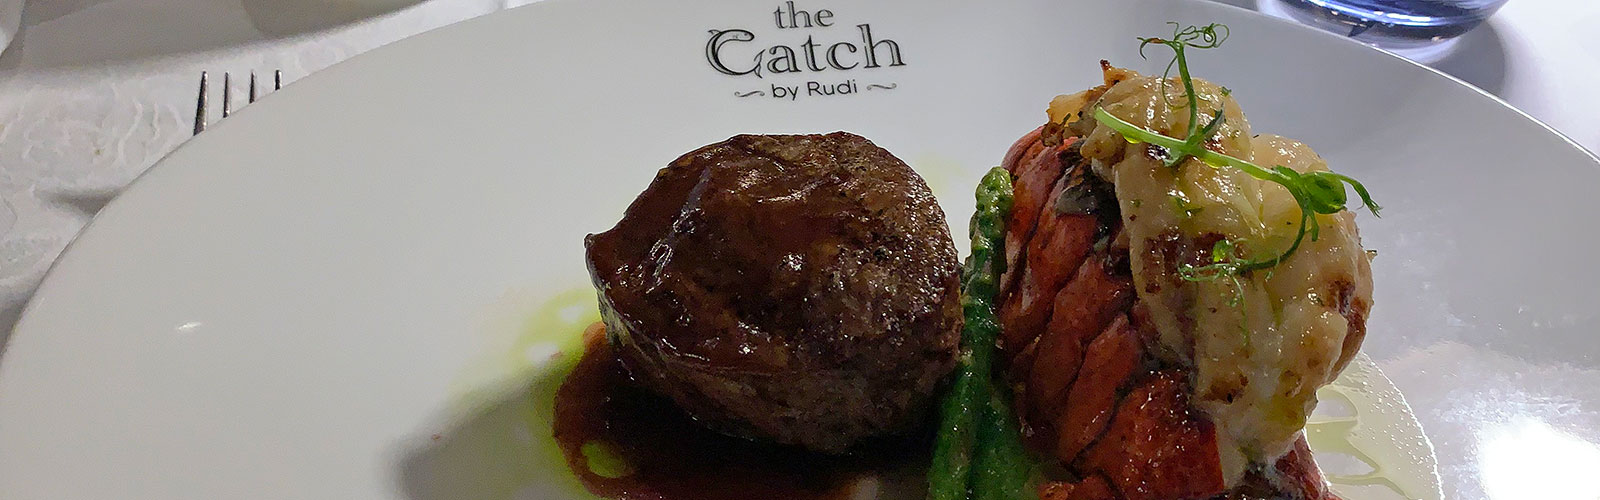 Steak and Lobster from Catch By Rudy